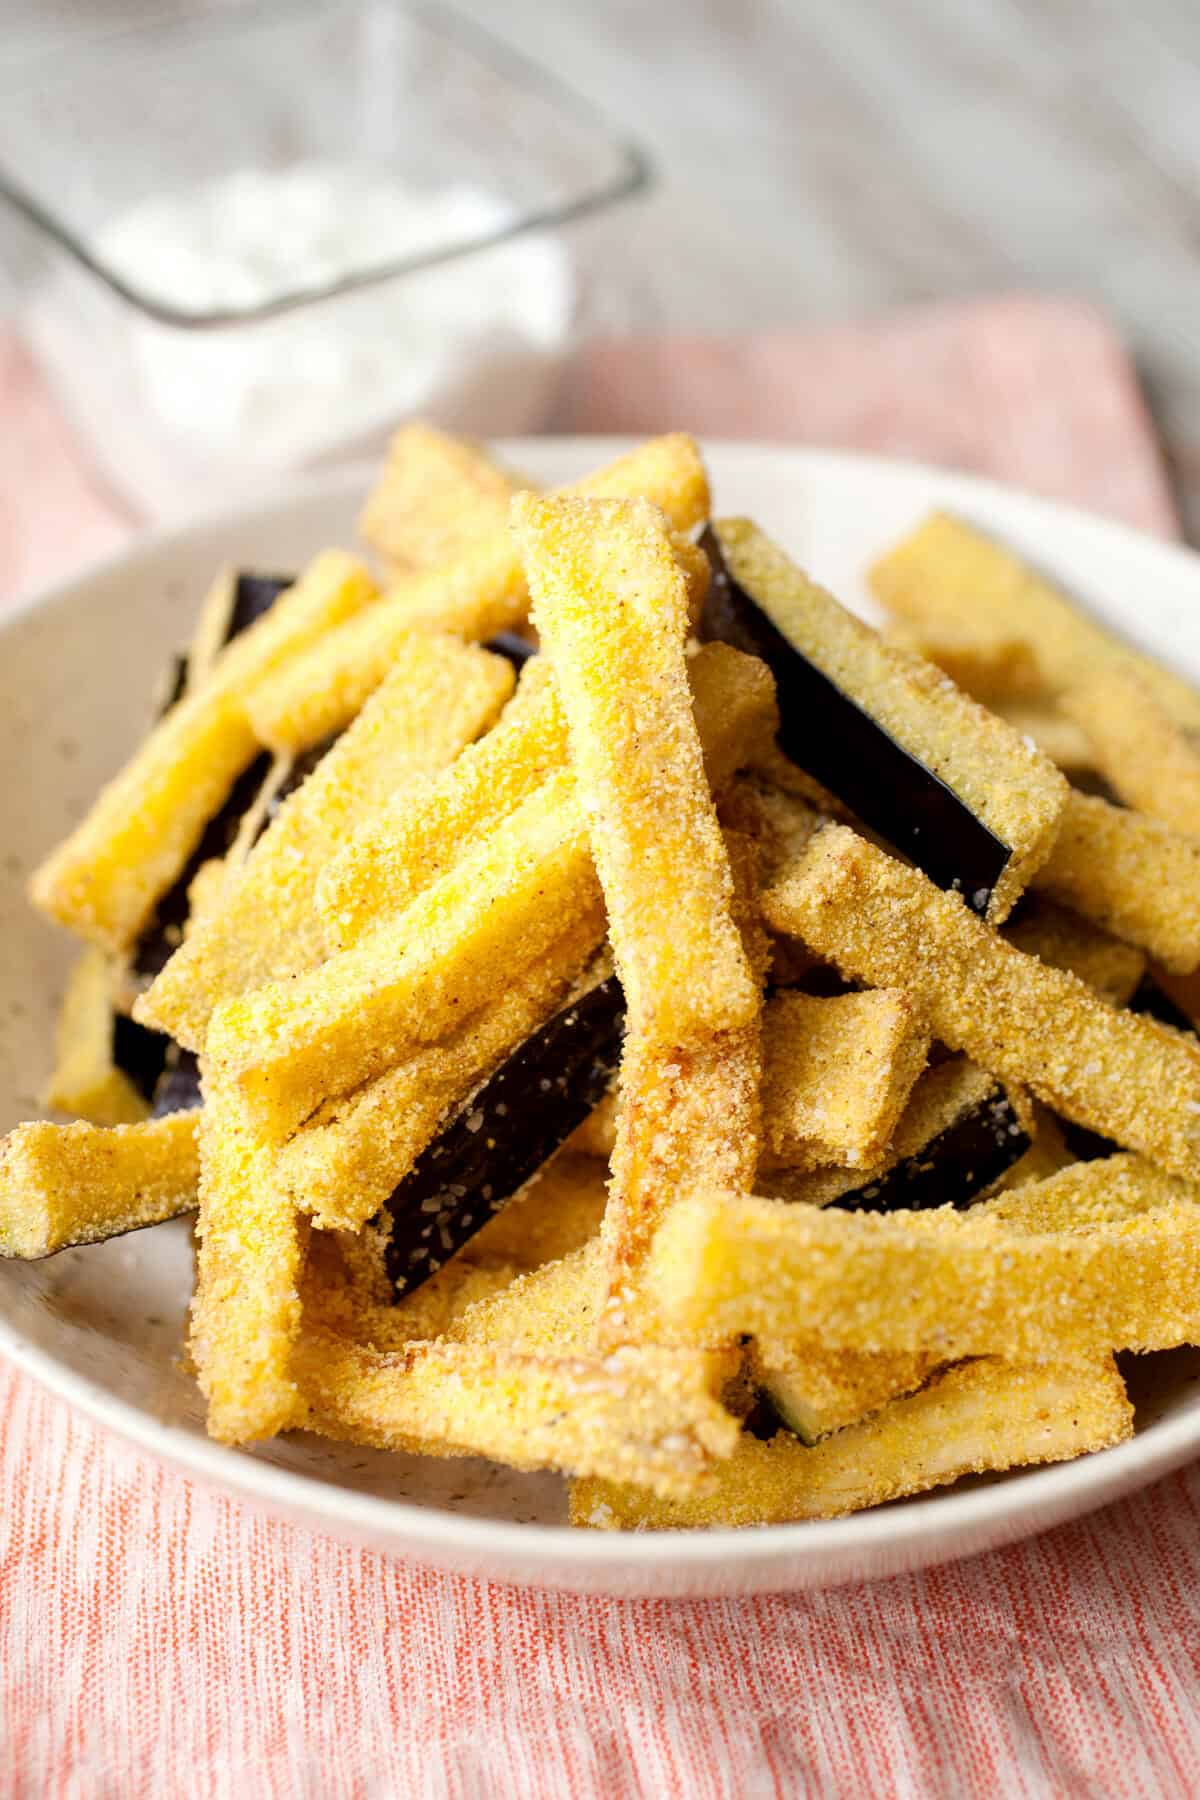 Homemade Eggplant Fries: Crispy sticks of fried eggplant are one of my favorite side dishes. Relatively easy to make and perfect with a quick mint and yogurt dipping sauce! | macheesmo.com